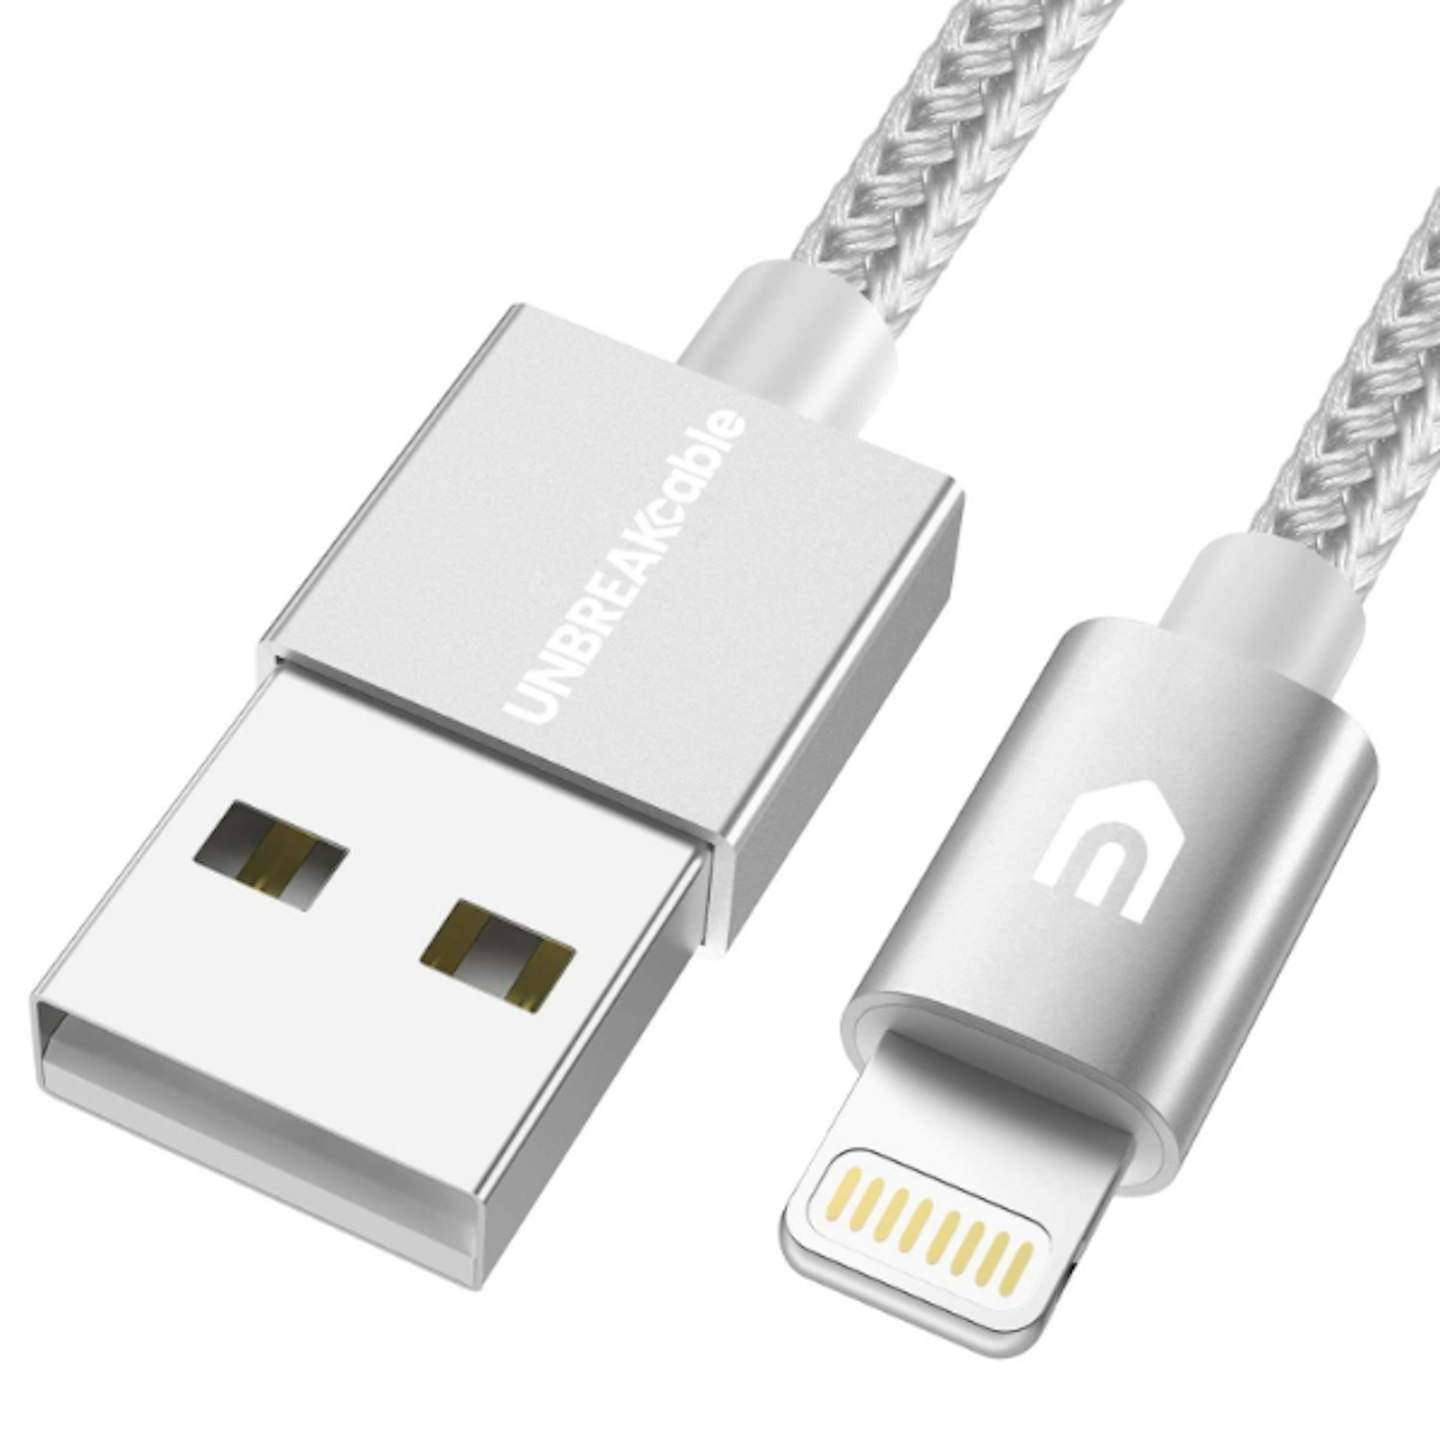 UNBREAKcable Lightning iPhone Cable